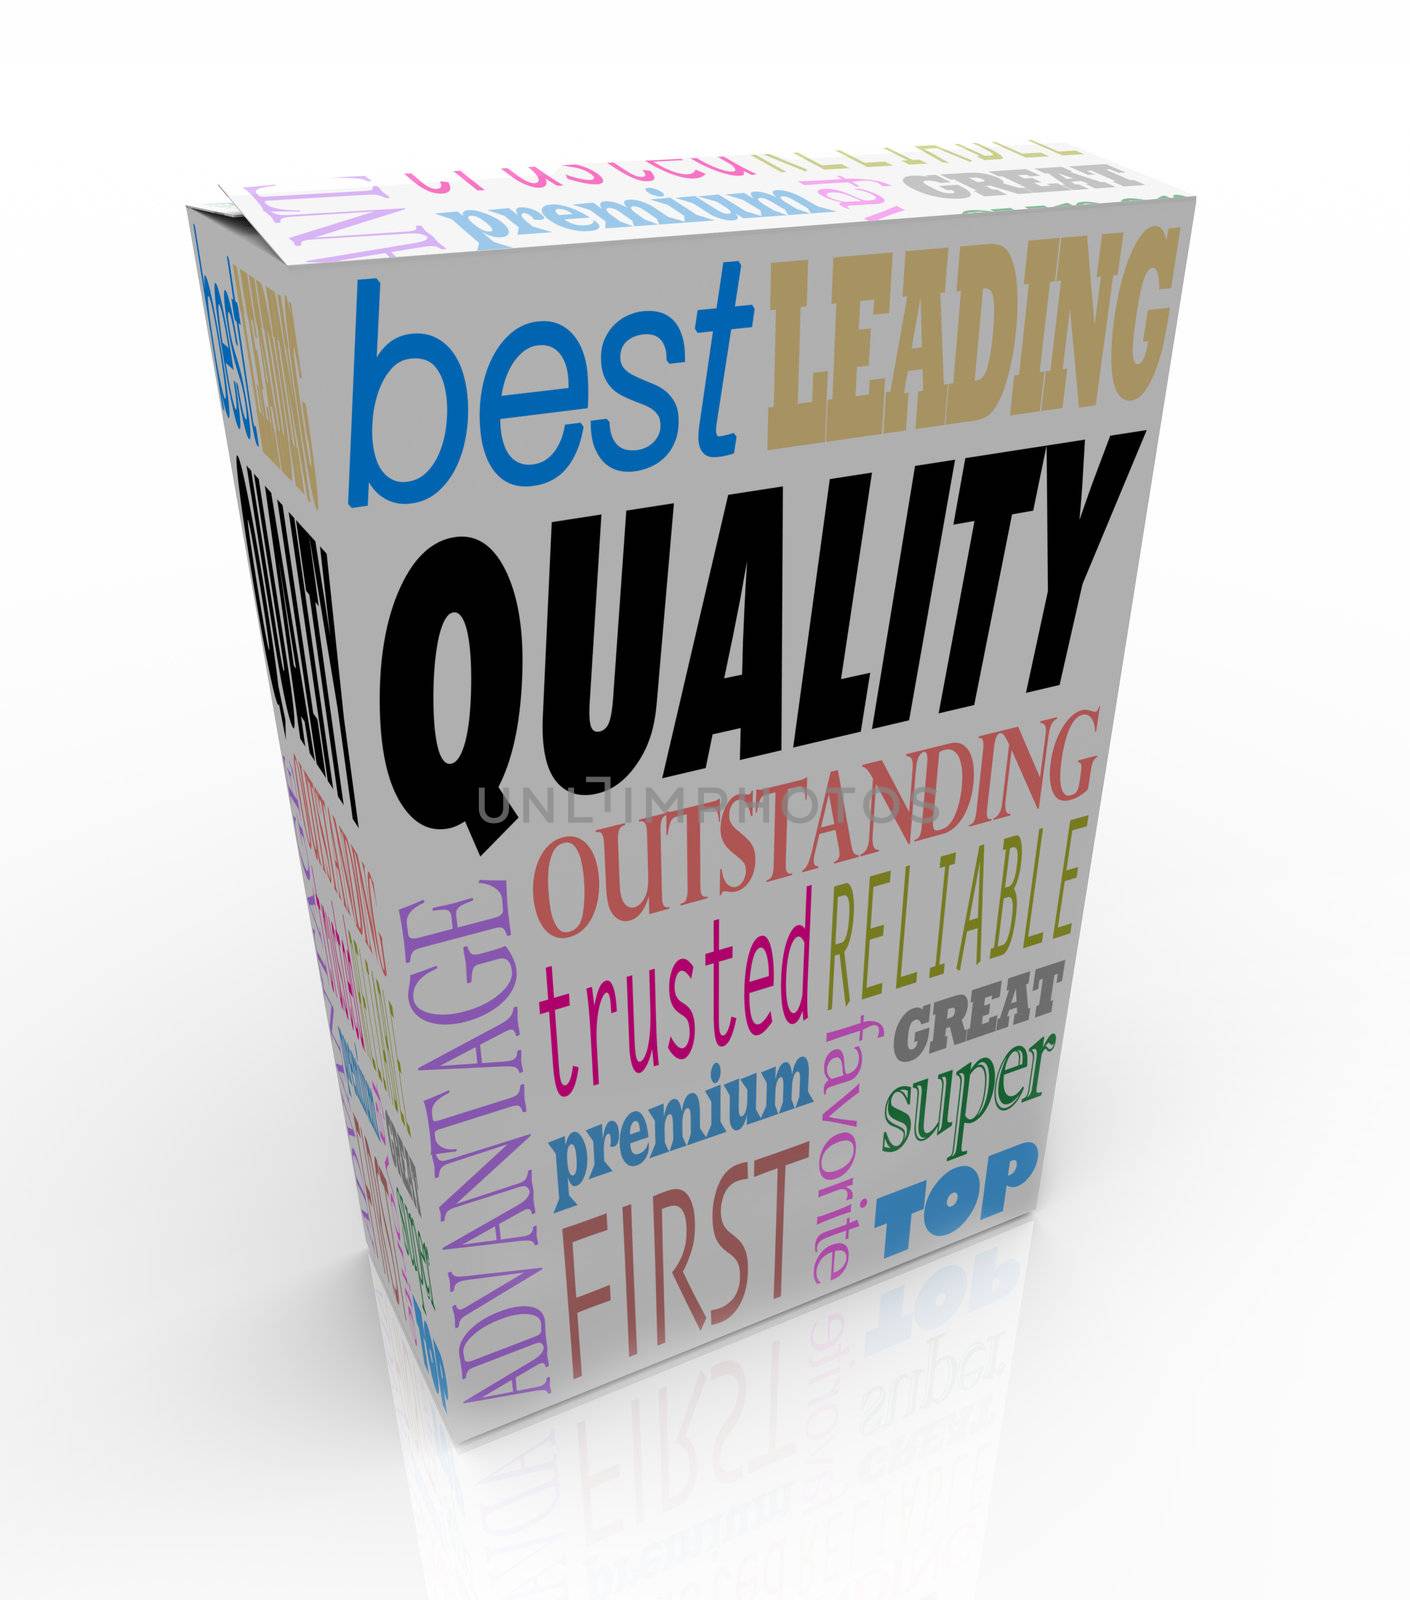 Quality makes your product stand out, with positive words and terms on the package such as best, leading, outstanding, great, trusted, reliable, premium, favorite and more